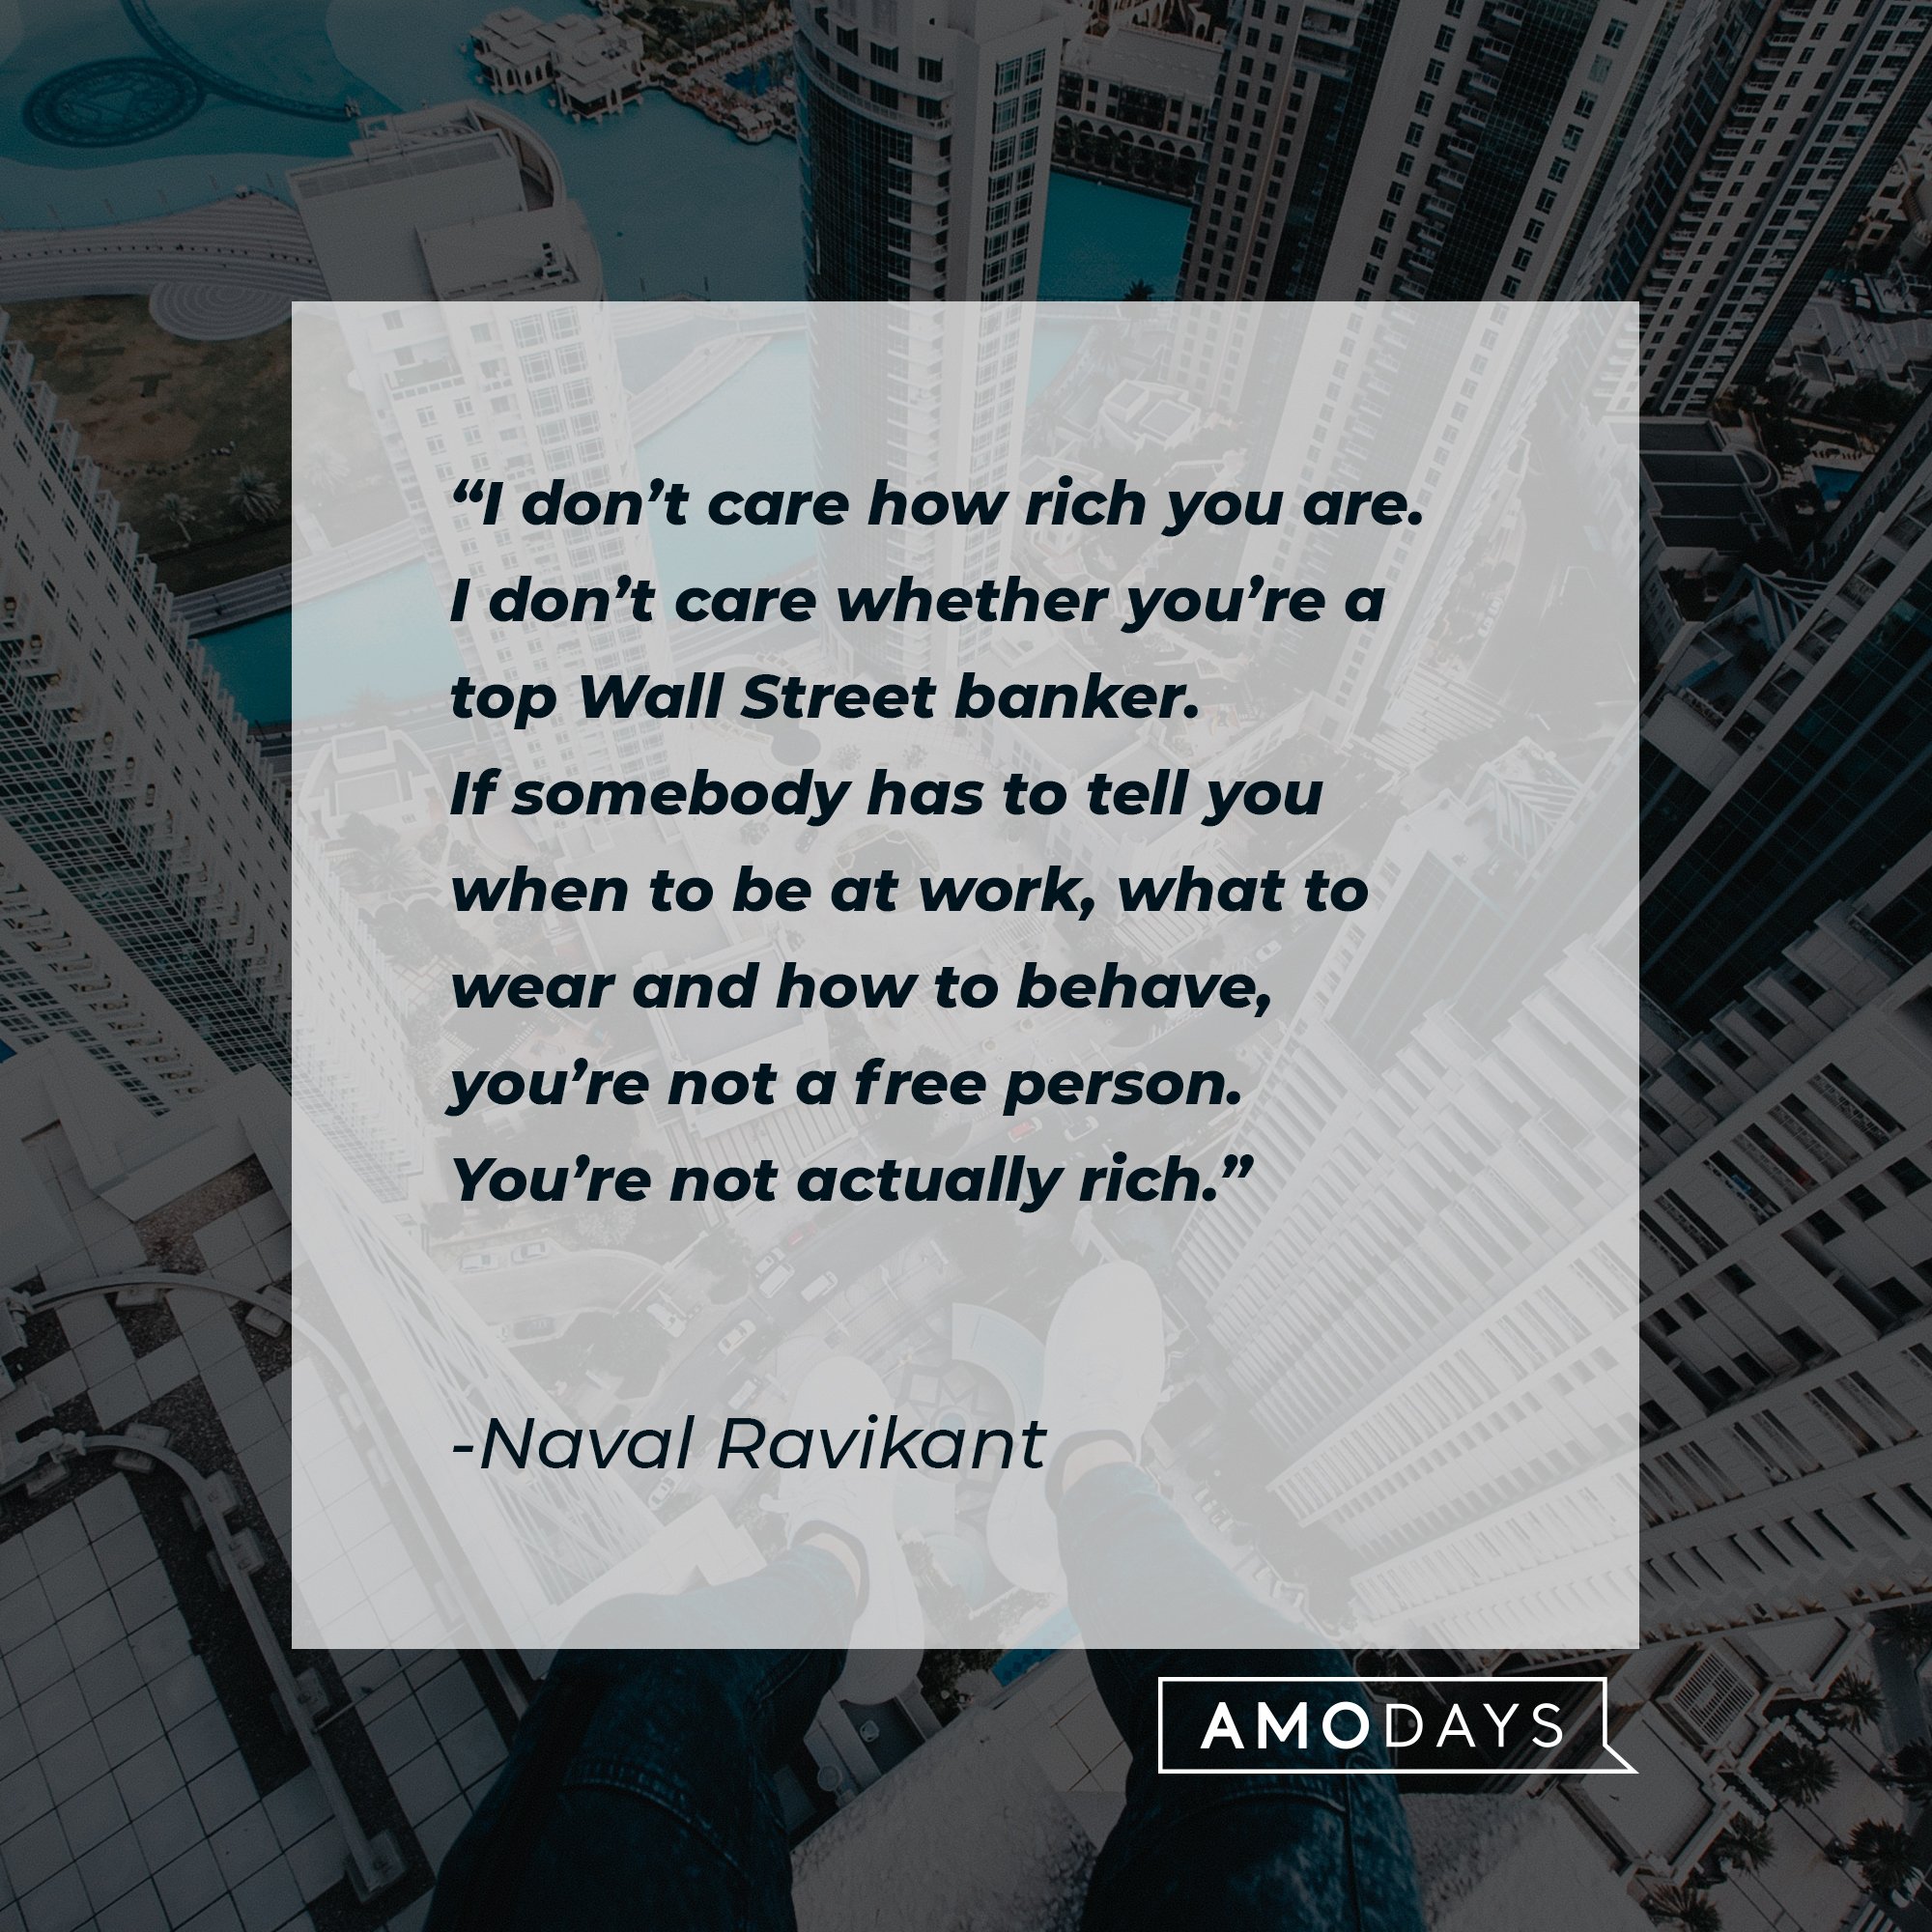  Naval Ravikant's quote: "I don’t care how rich you are. I don’t care whether you’re a top Wall Street banker. If somebody has to tell you when to be at work, what to wear and how to behave, you’re not a free person. You’re not actually rich." | Image: AMoDays